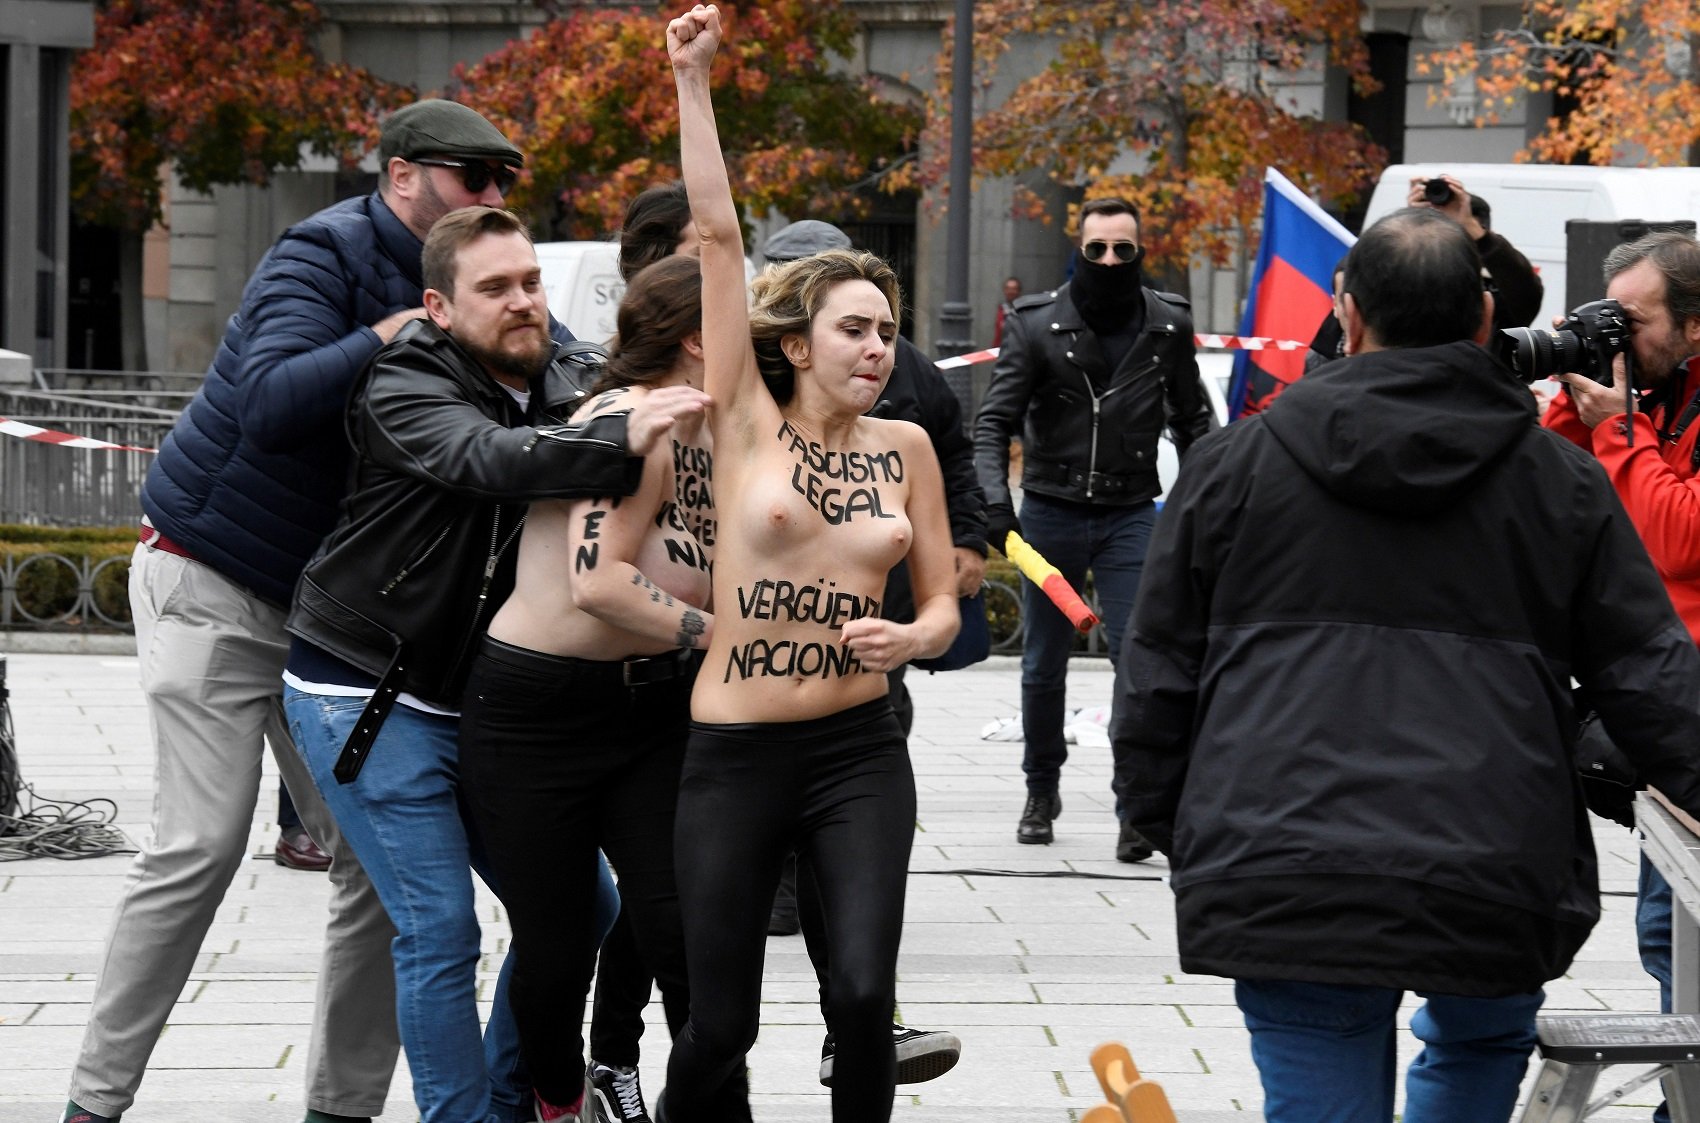 Fascists chant "Franco, Franco" in Madrid, and Femen responds with counter protest